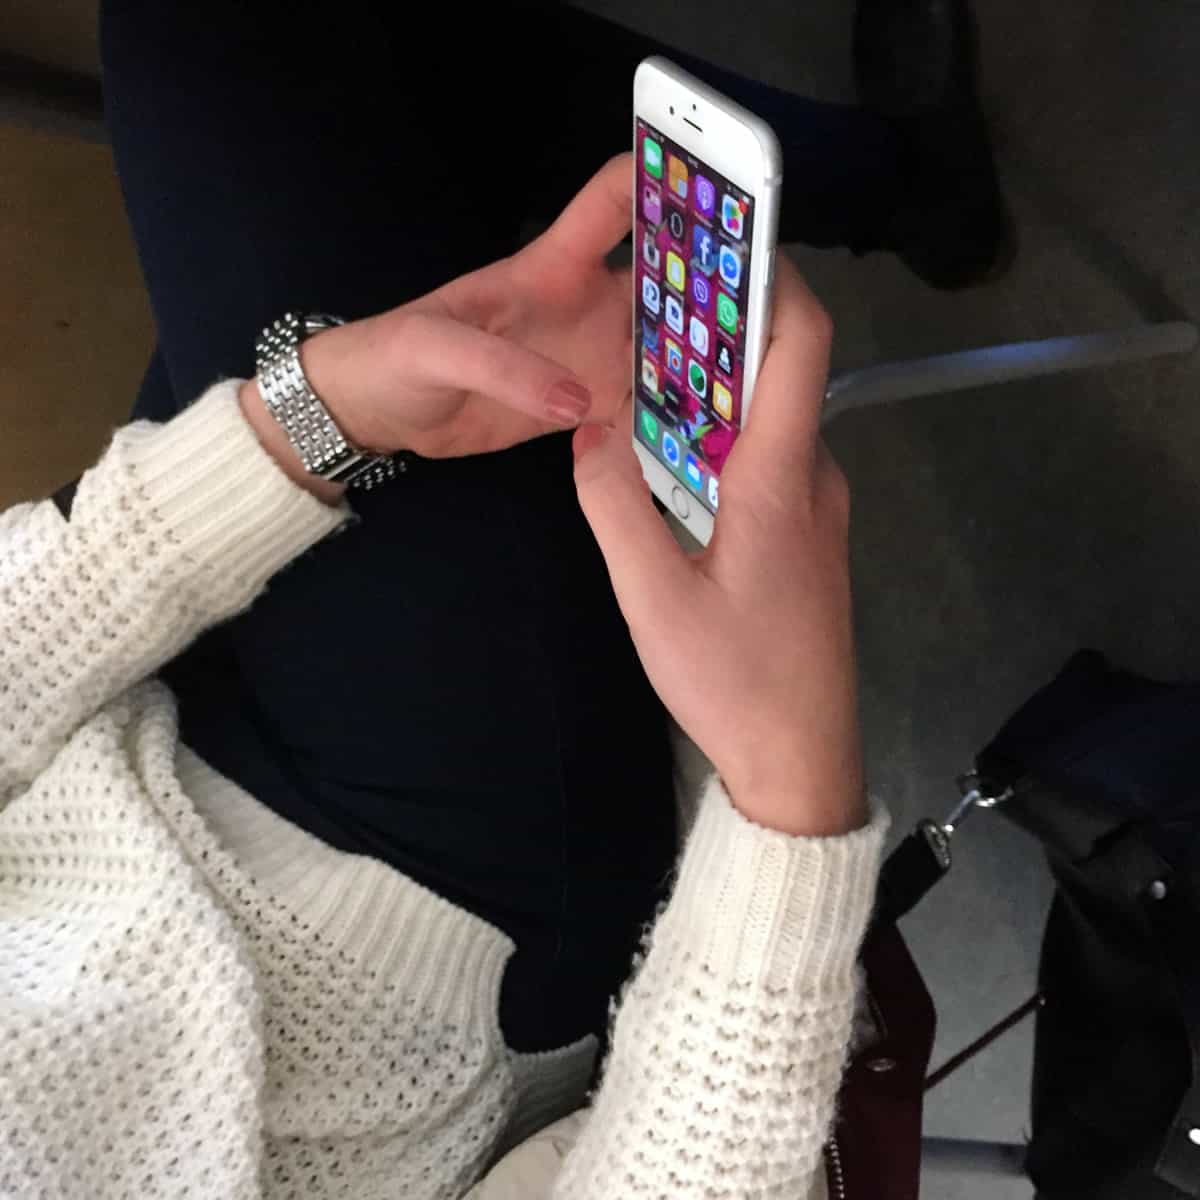 A photo of a woman holding a silver iPhone in her hands.